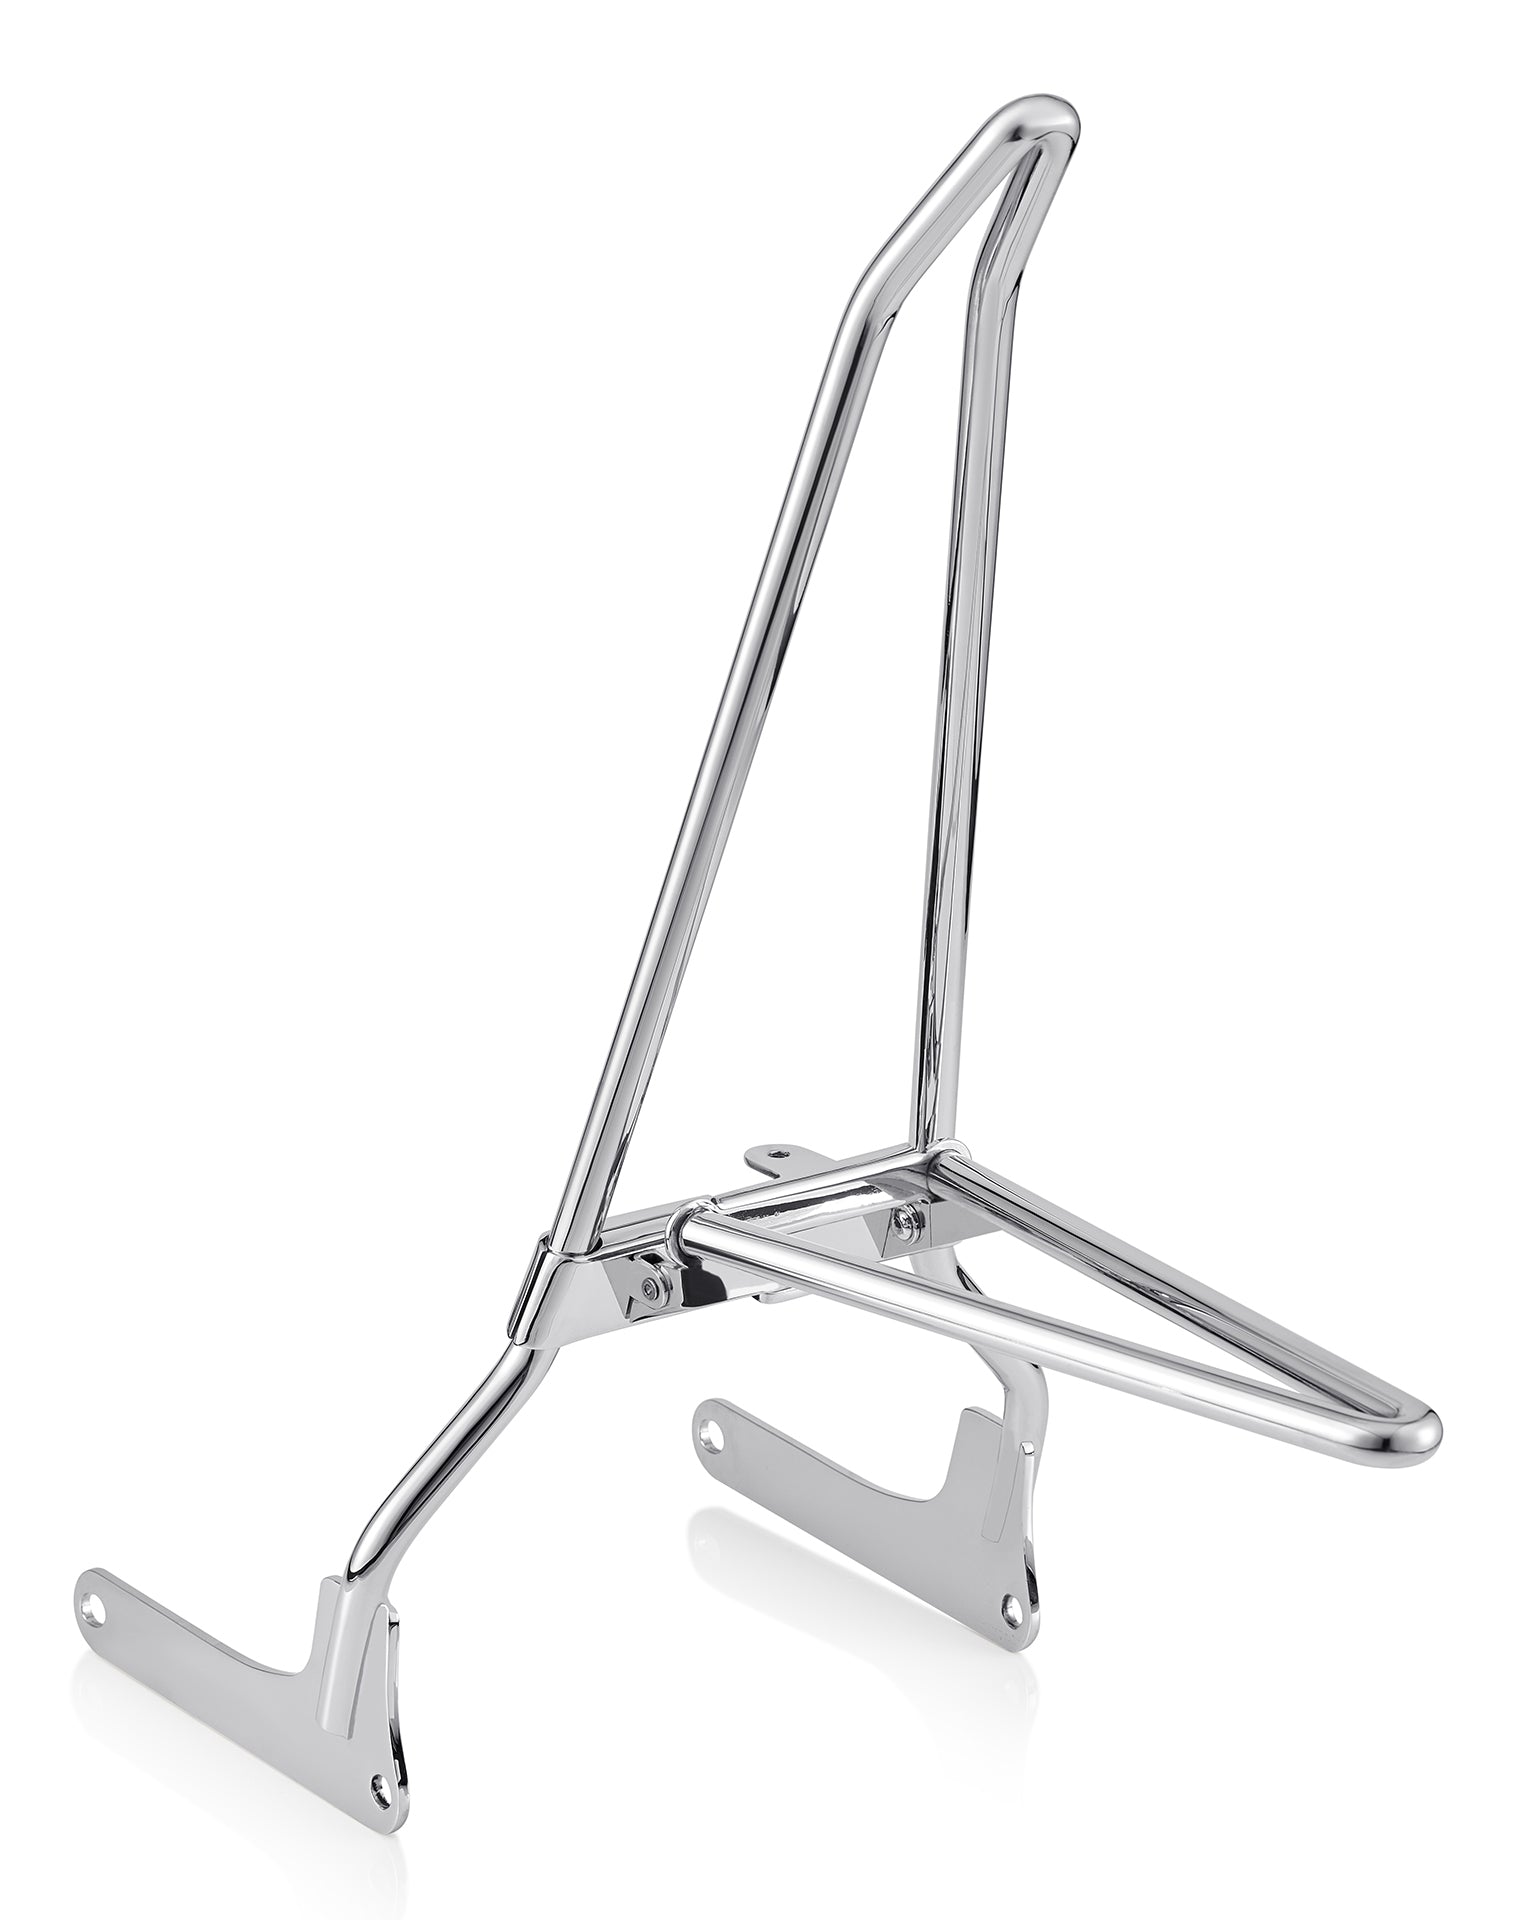 Iron Born Blade 25" Sissy Bar w/ Foldable Luggage Rack for Harley Softail Low Rider S FXLRS Chrome